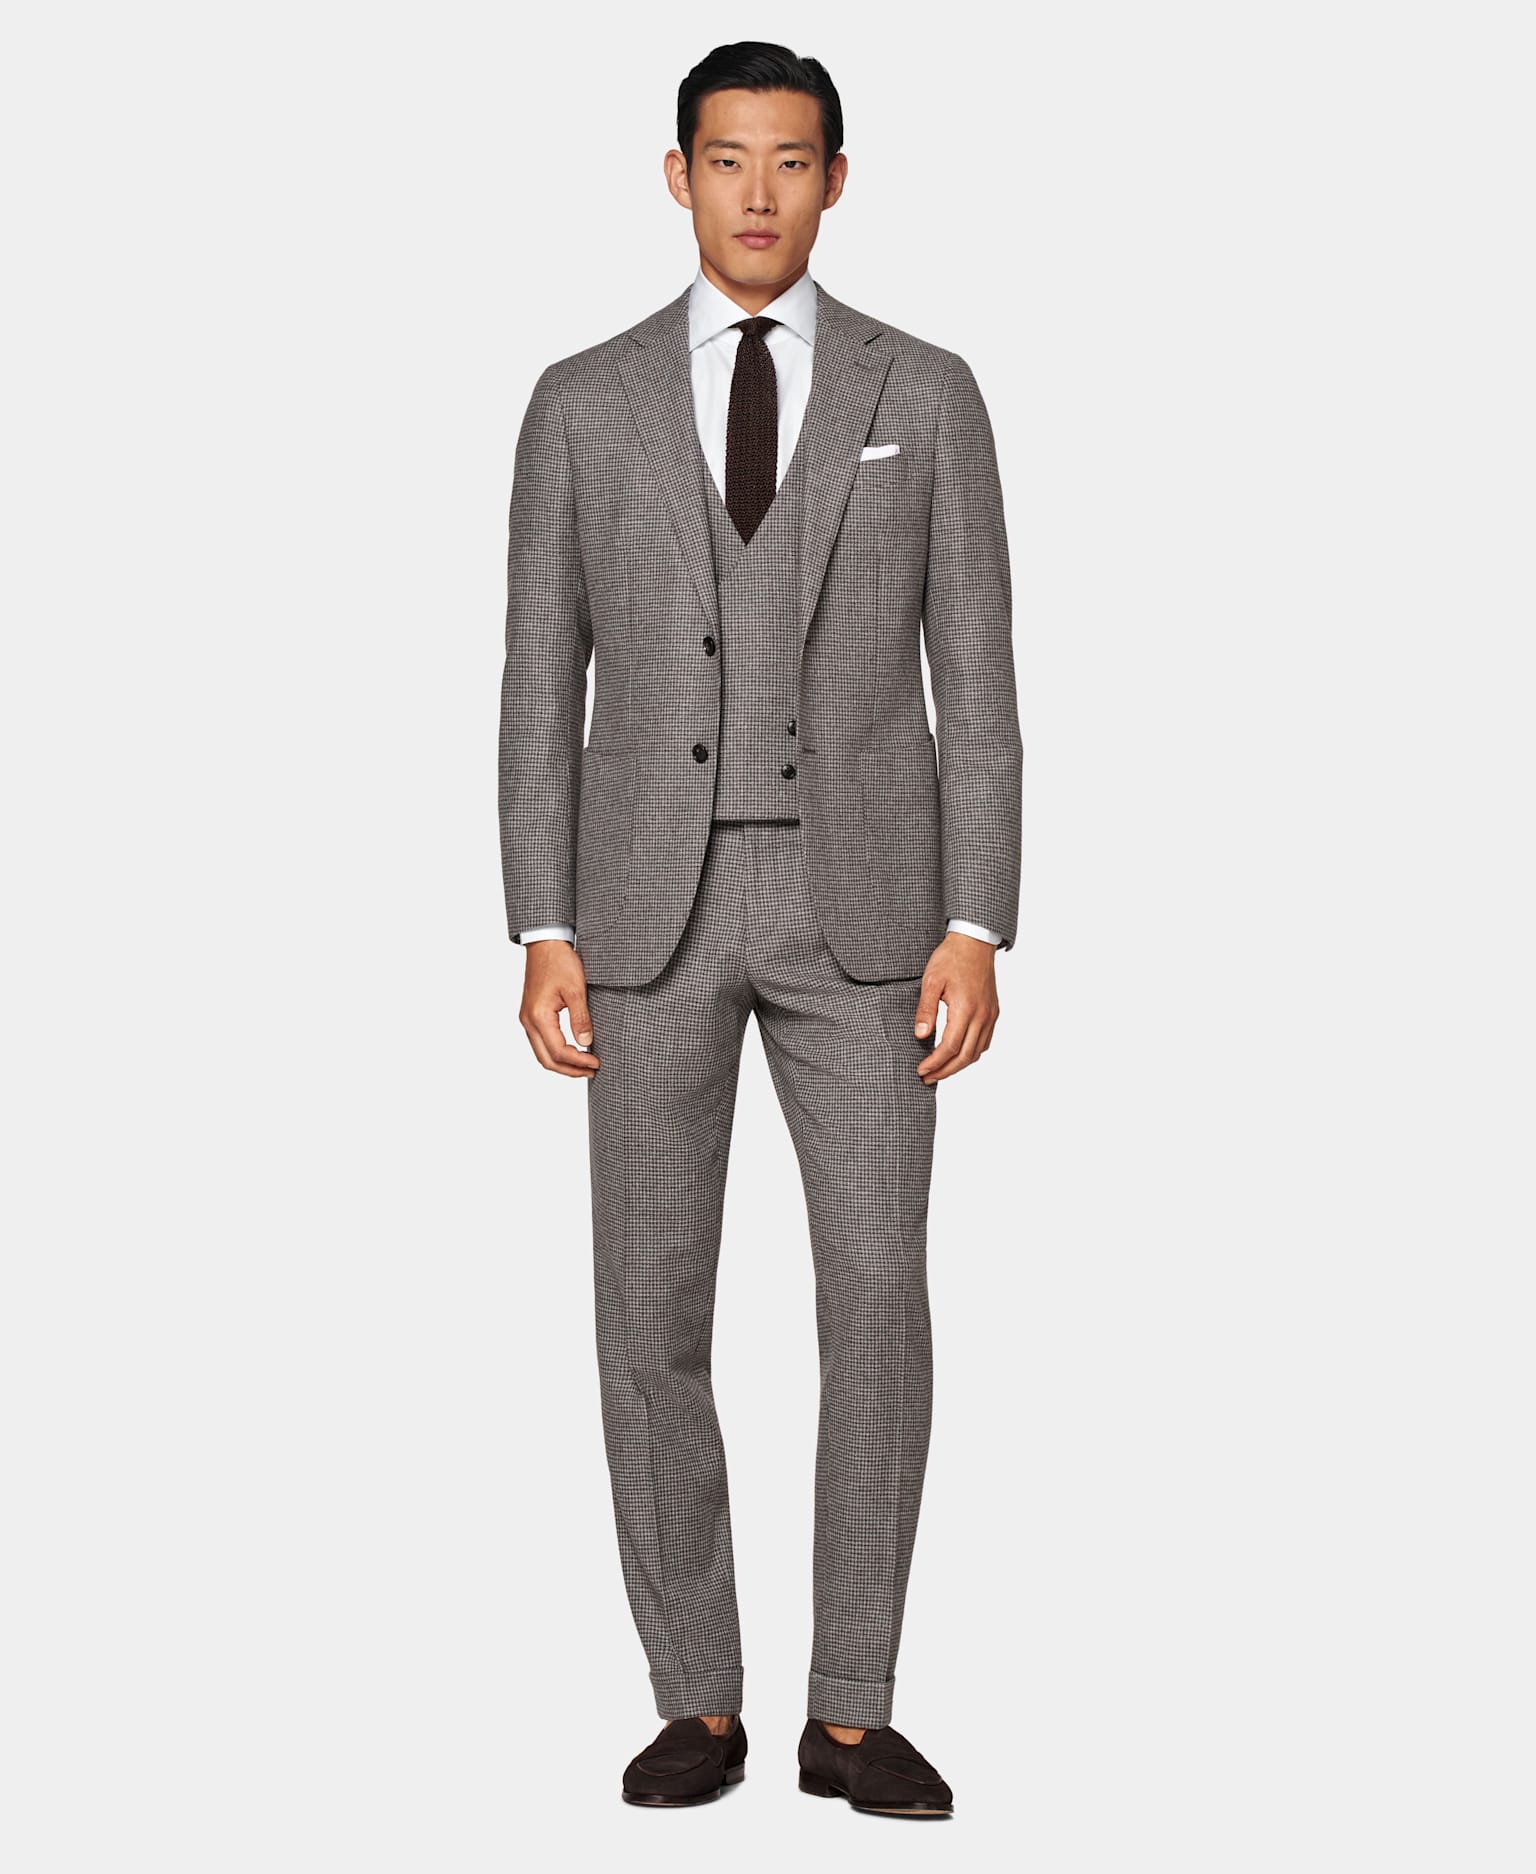 Houndstooth check 3-piece suit with a white shirt and brown silk knitted tie.